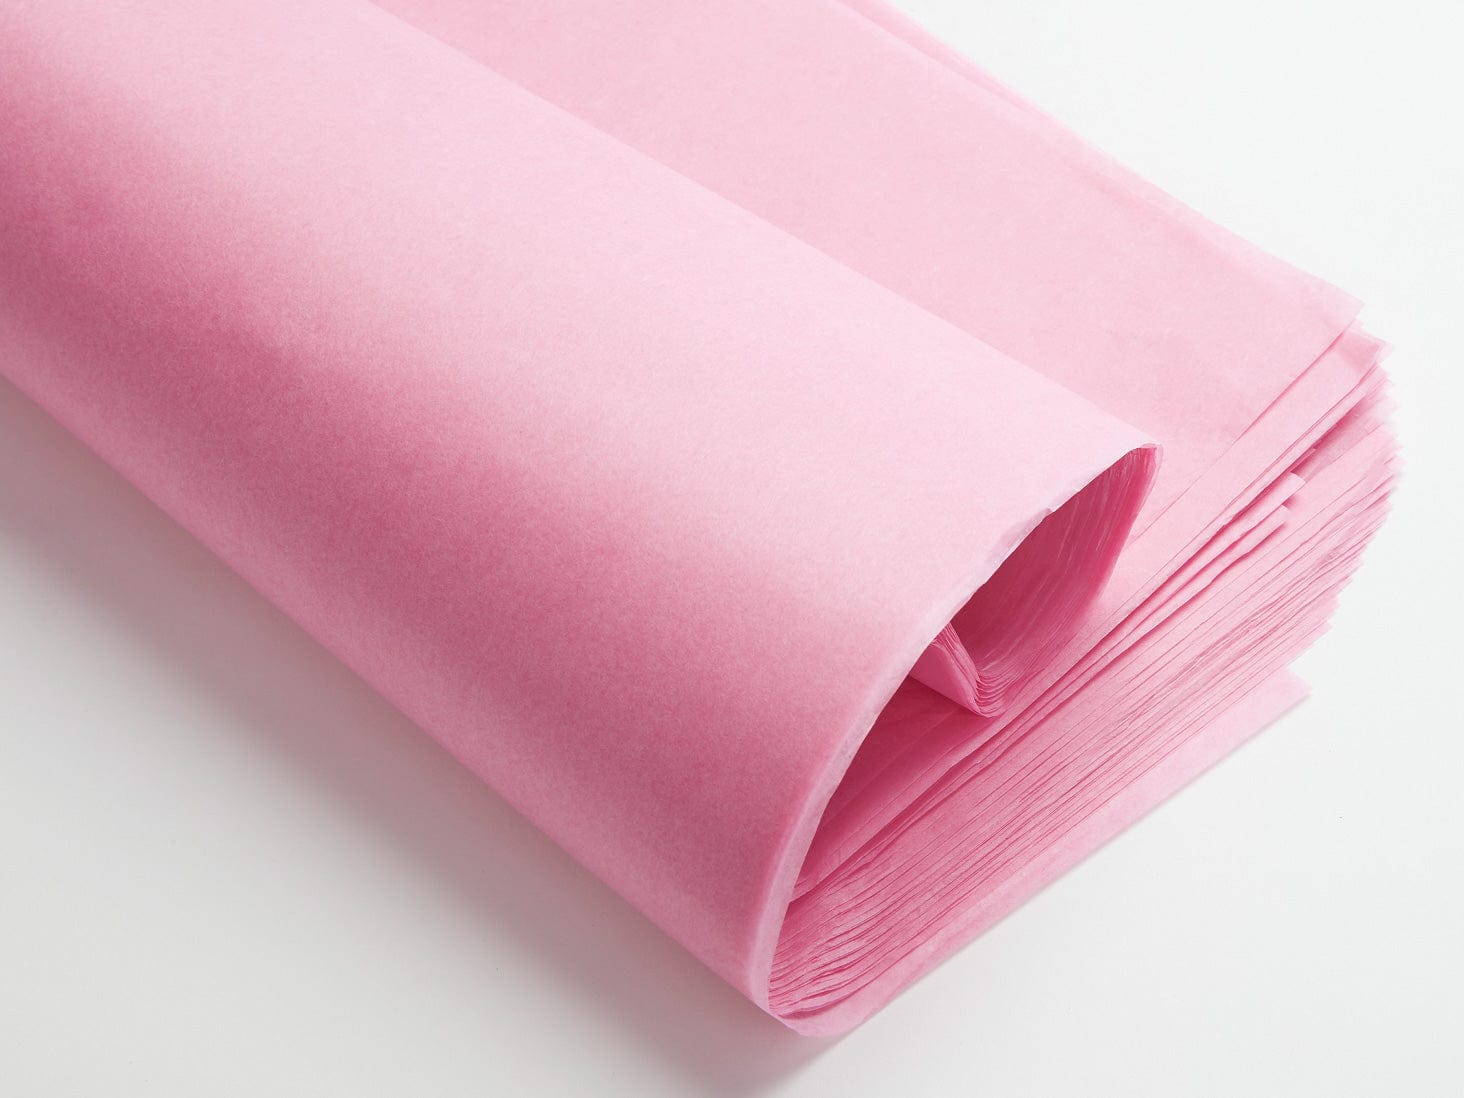 Rose Pink Luxury Tissue Paper 240 Sheets